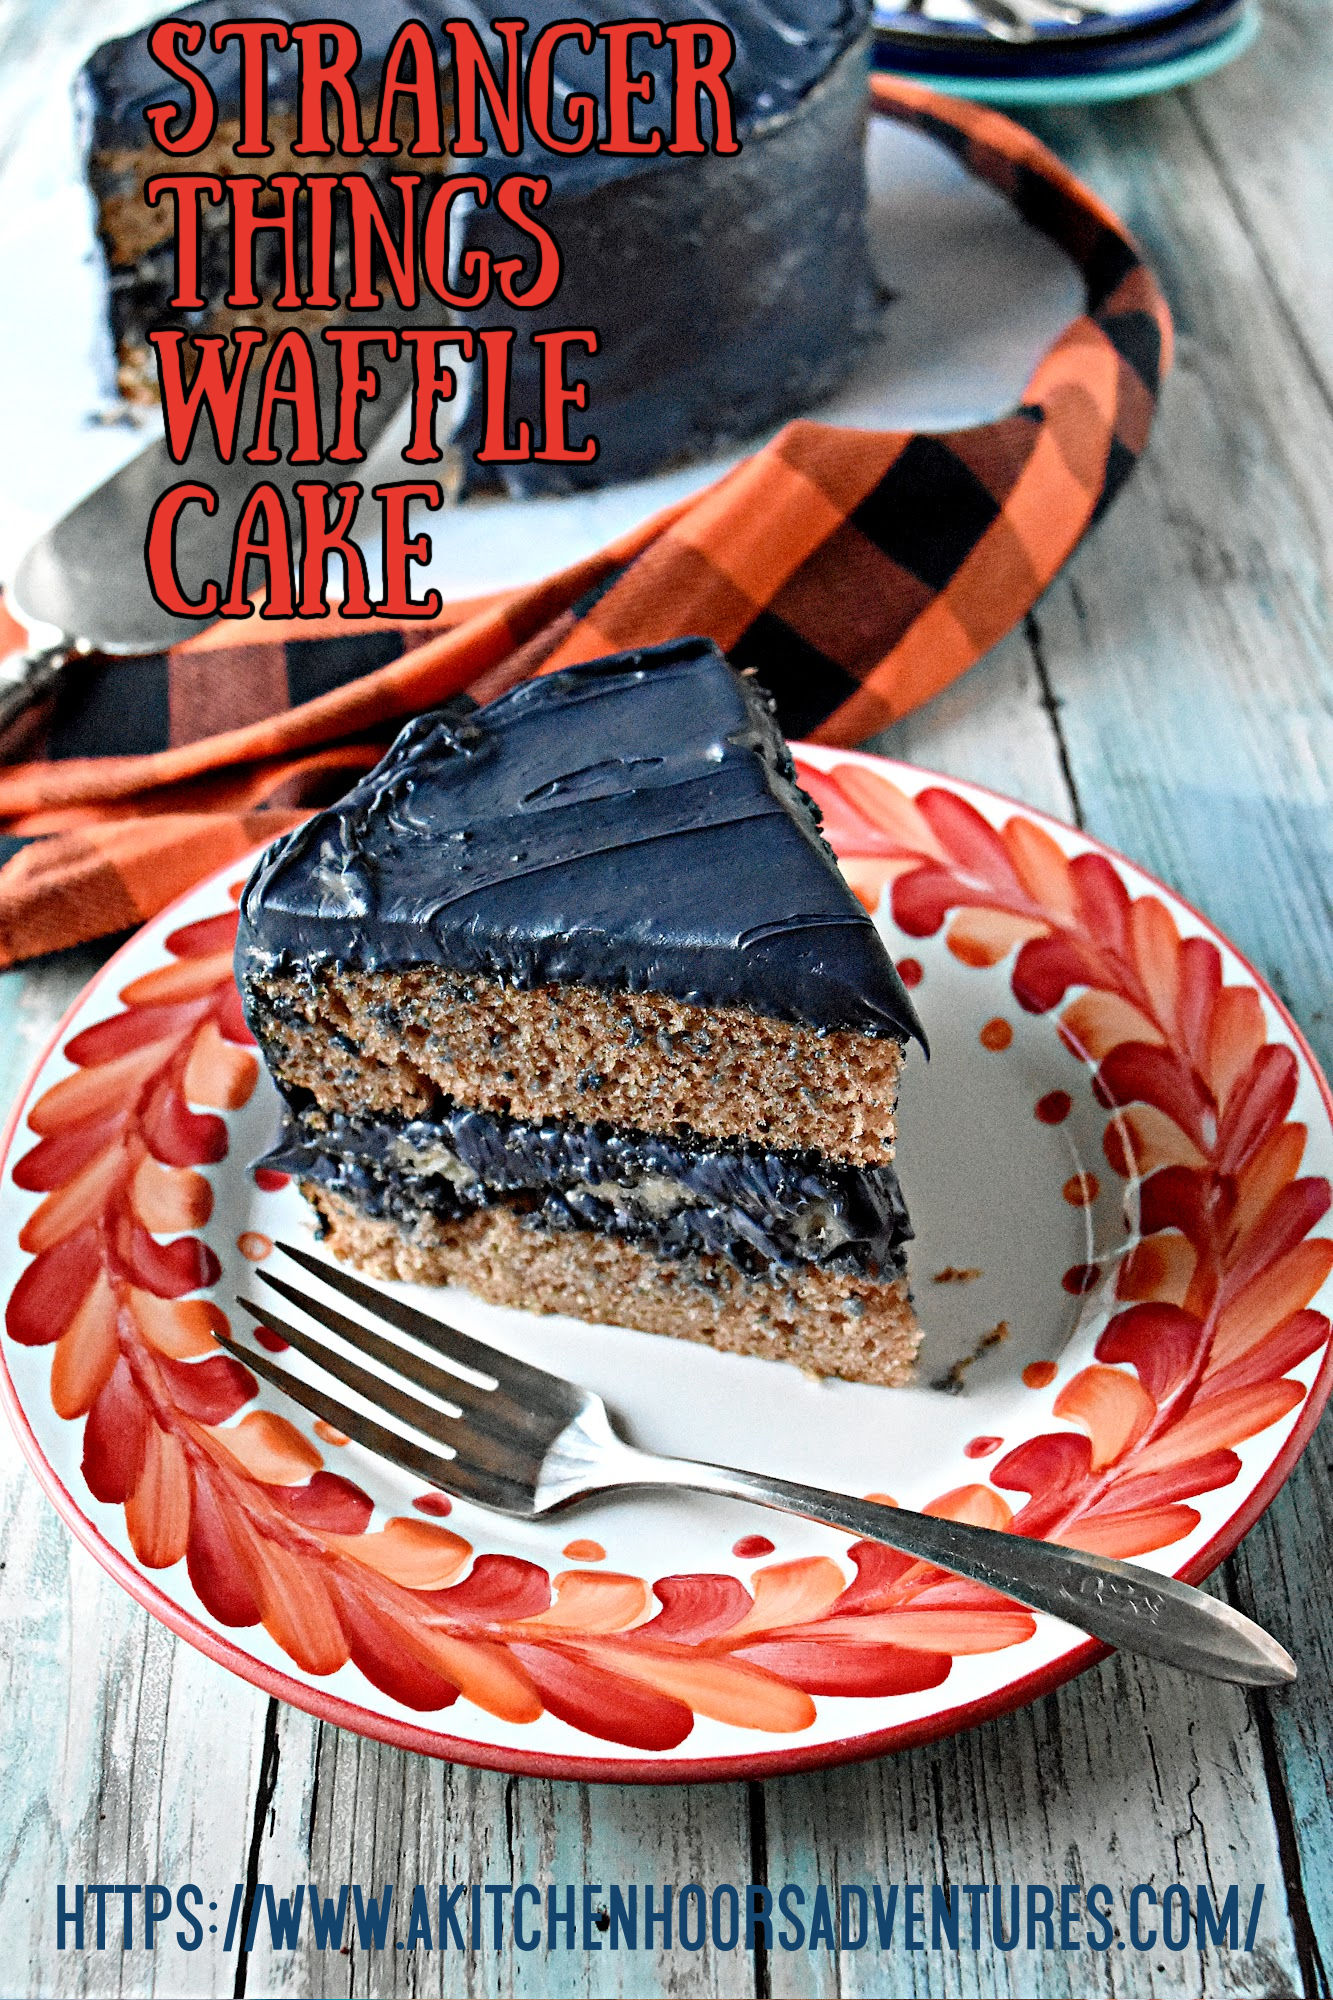 Stranger Things Waffle Cake is a spiced cake with a twist.  There’s a waffle layer in the middle adding a fun twist to this cake.   #HalloweenTreatsWeek #StrangerThings #cake #Halloween #wafflecake